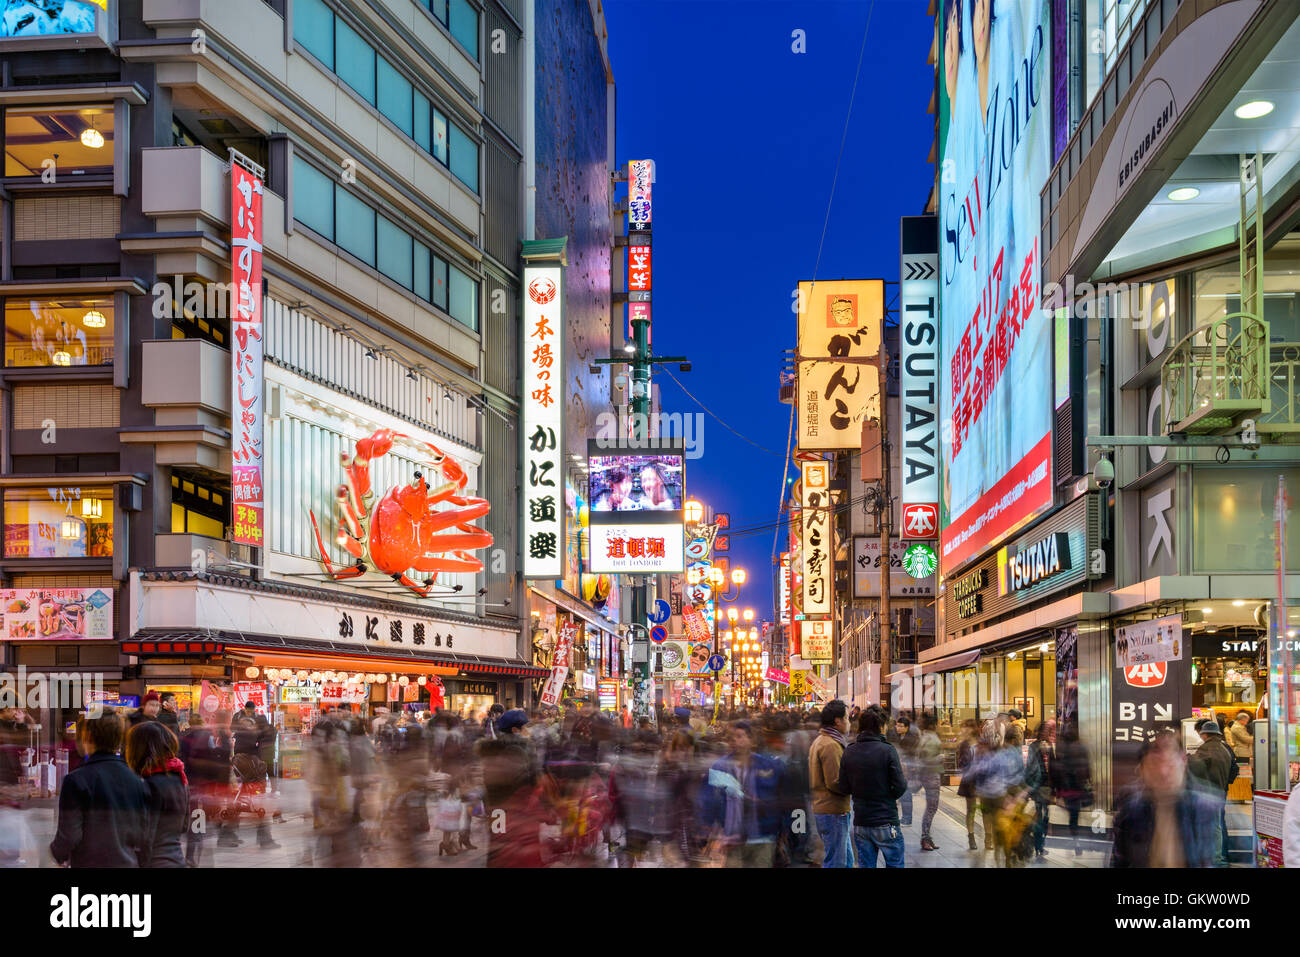 OSAKA, JAPAN - NOVEMBER 25, 2012: Crowds walk below the signs of Dotonbori. With a history reaching back to 1612, the district i Stock Photo